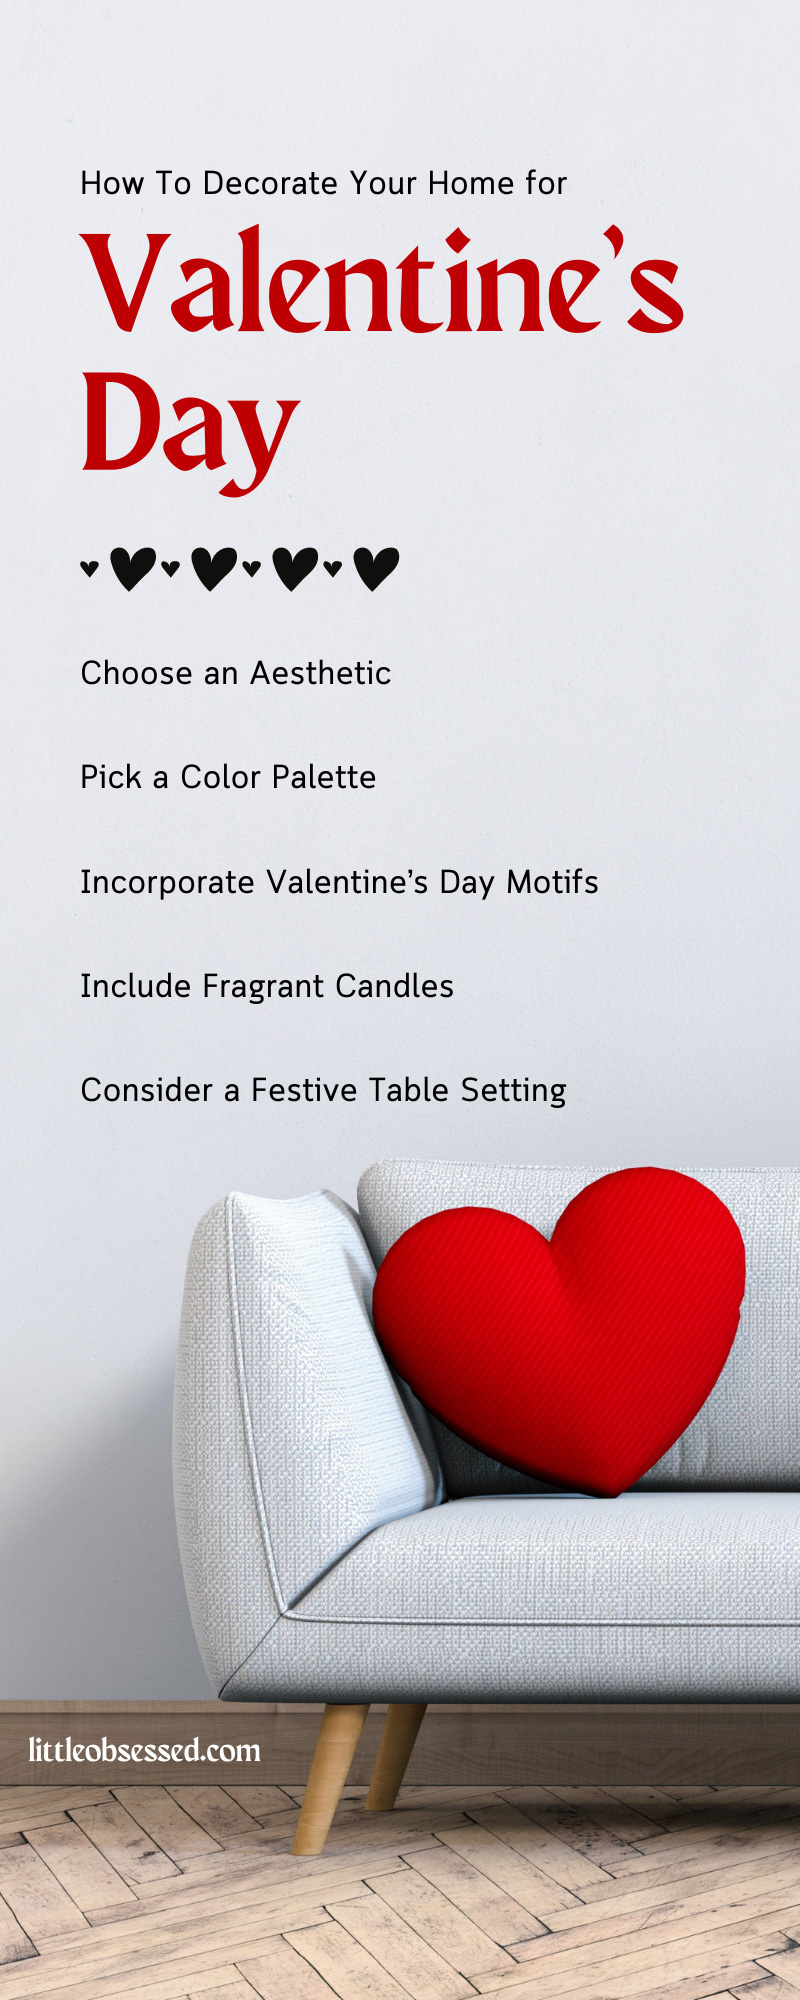 How To Decorate Your Home for Valentine’s Day